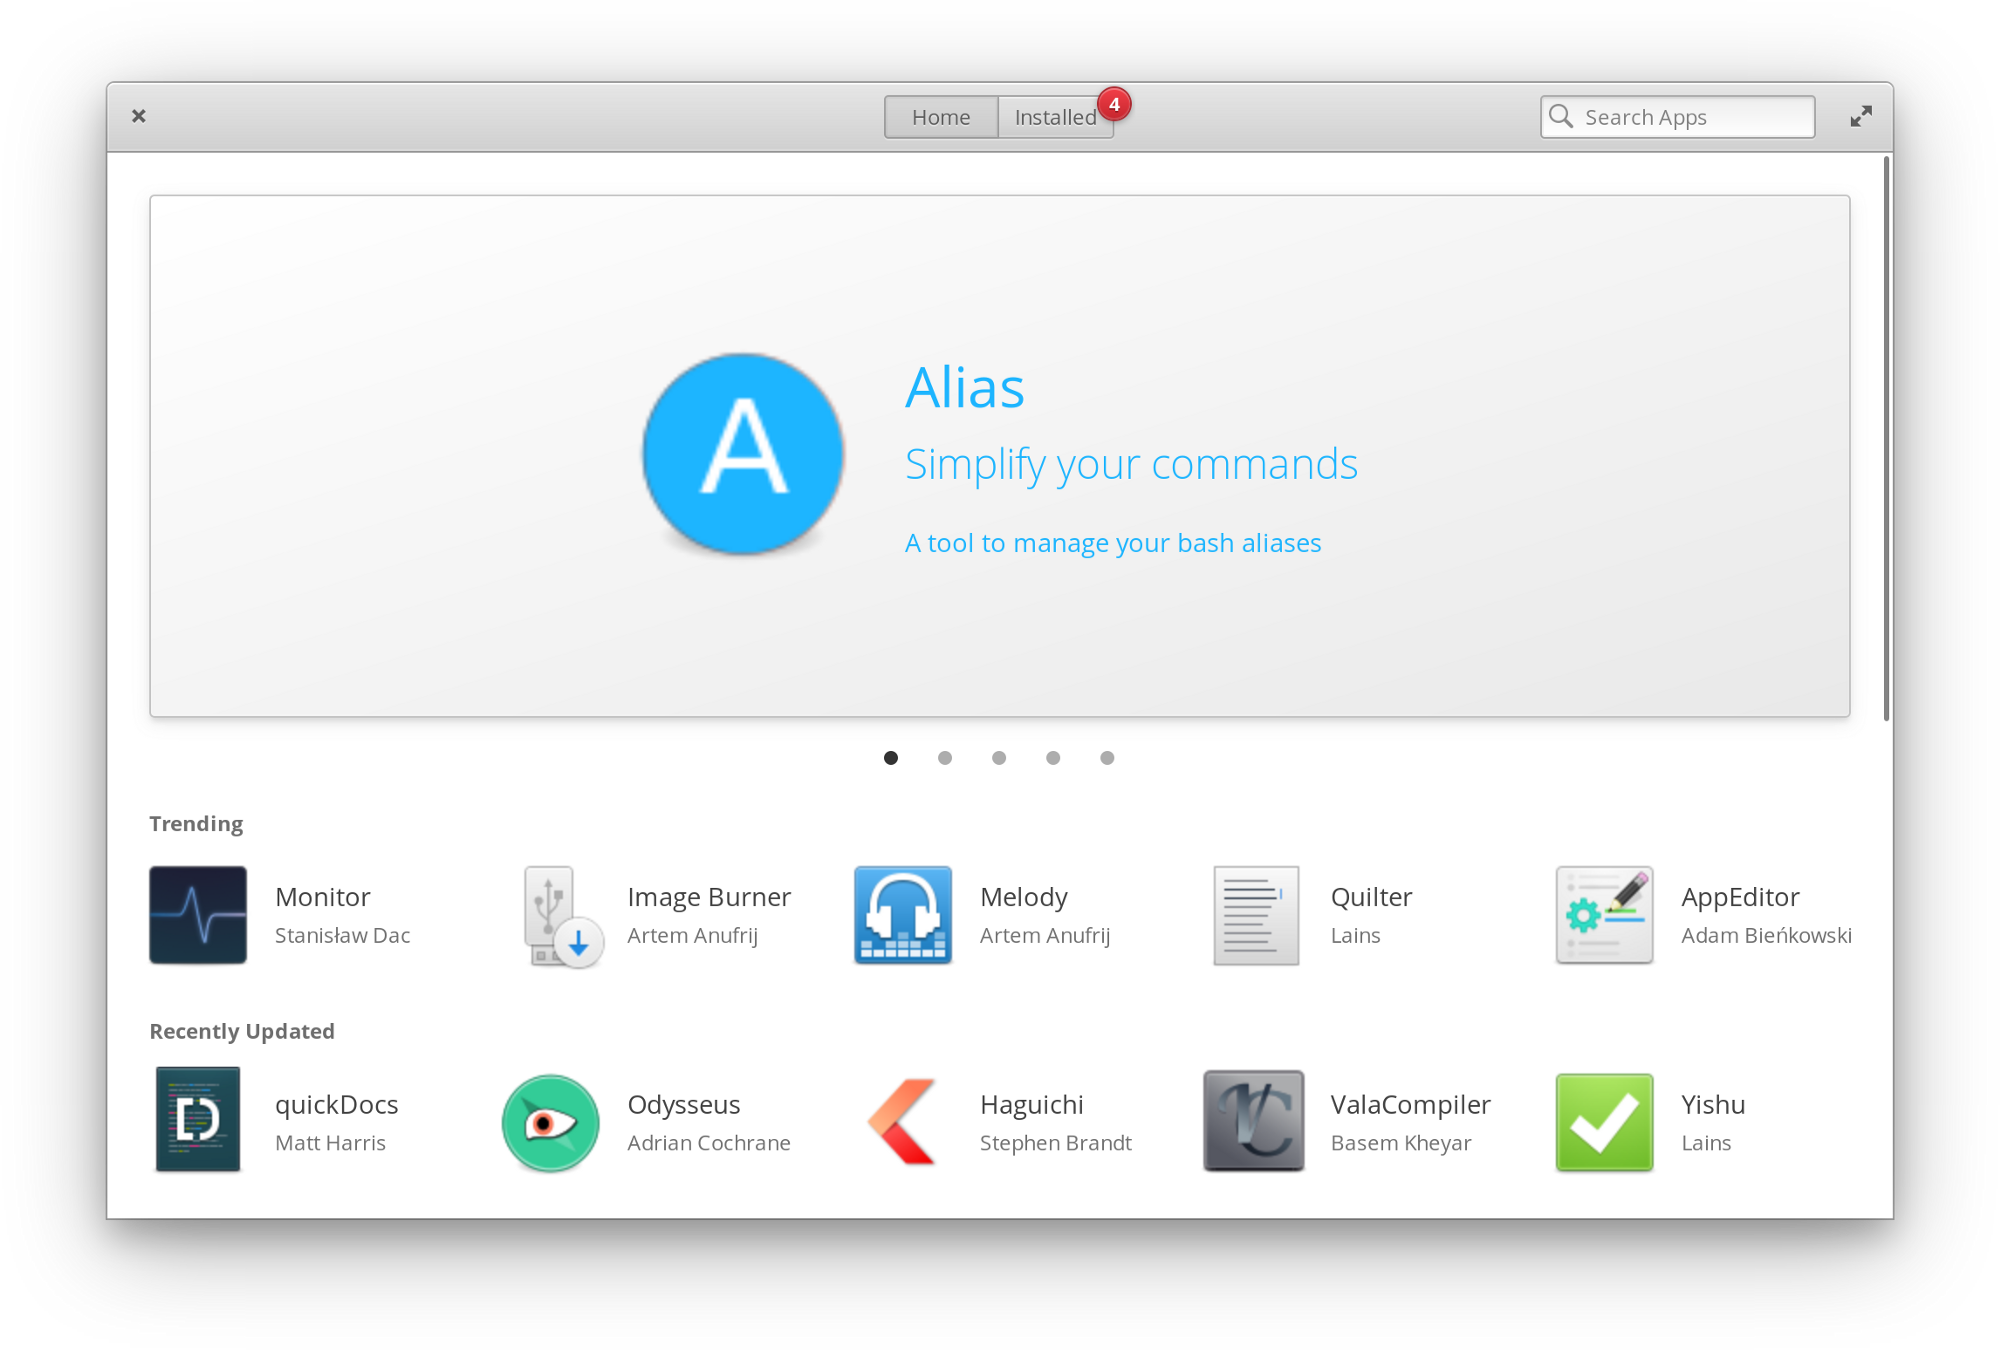 elementary os 5.0 download